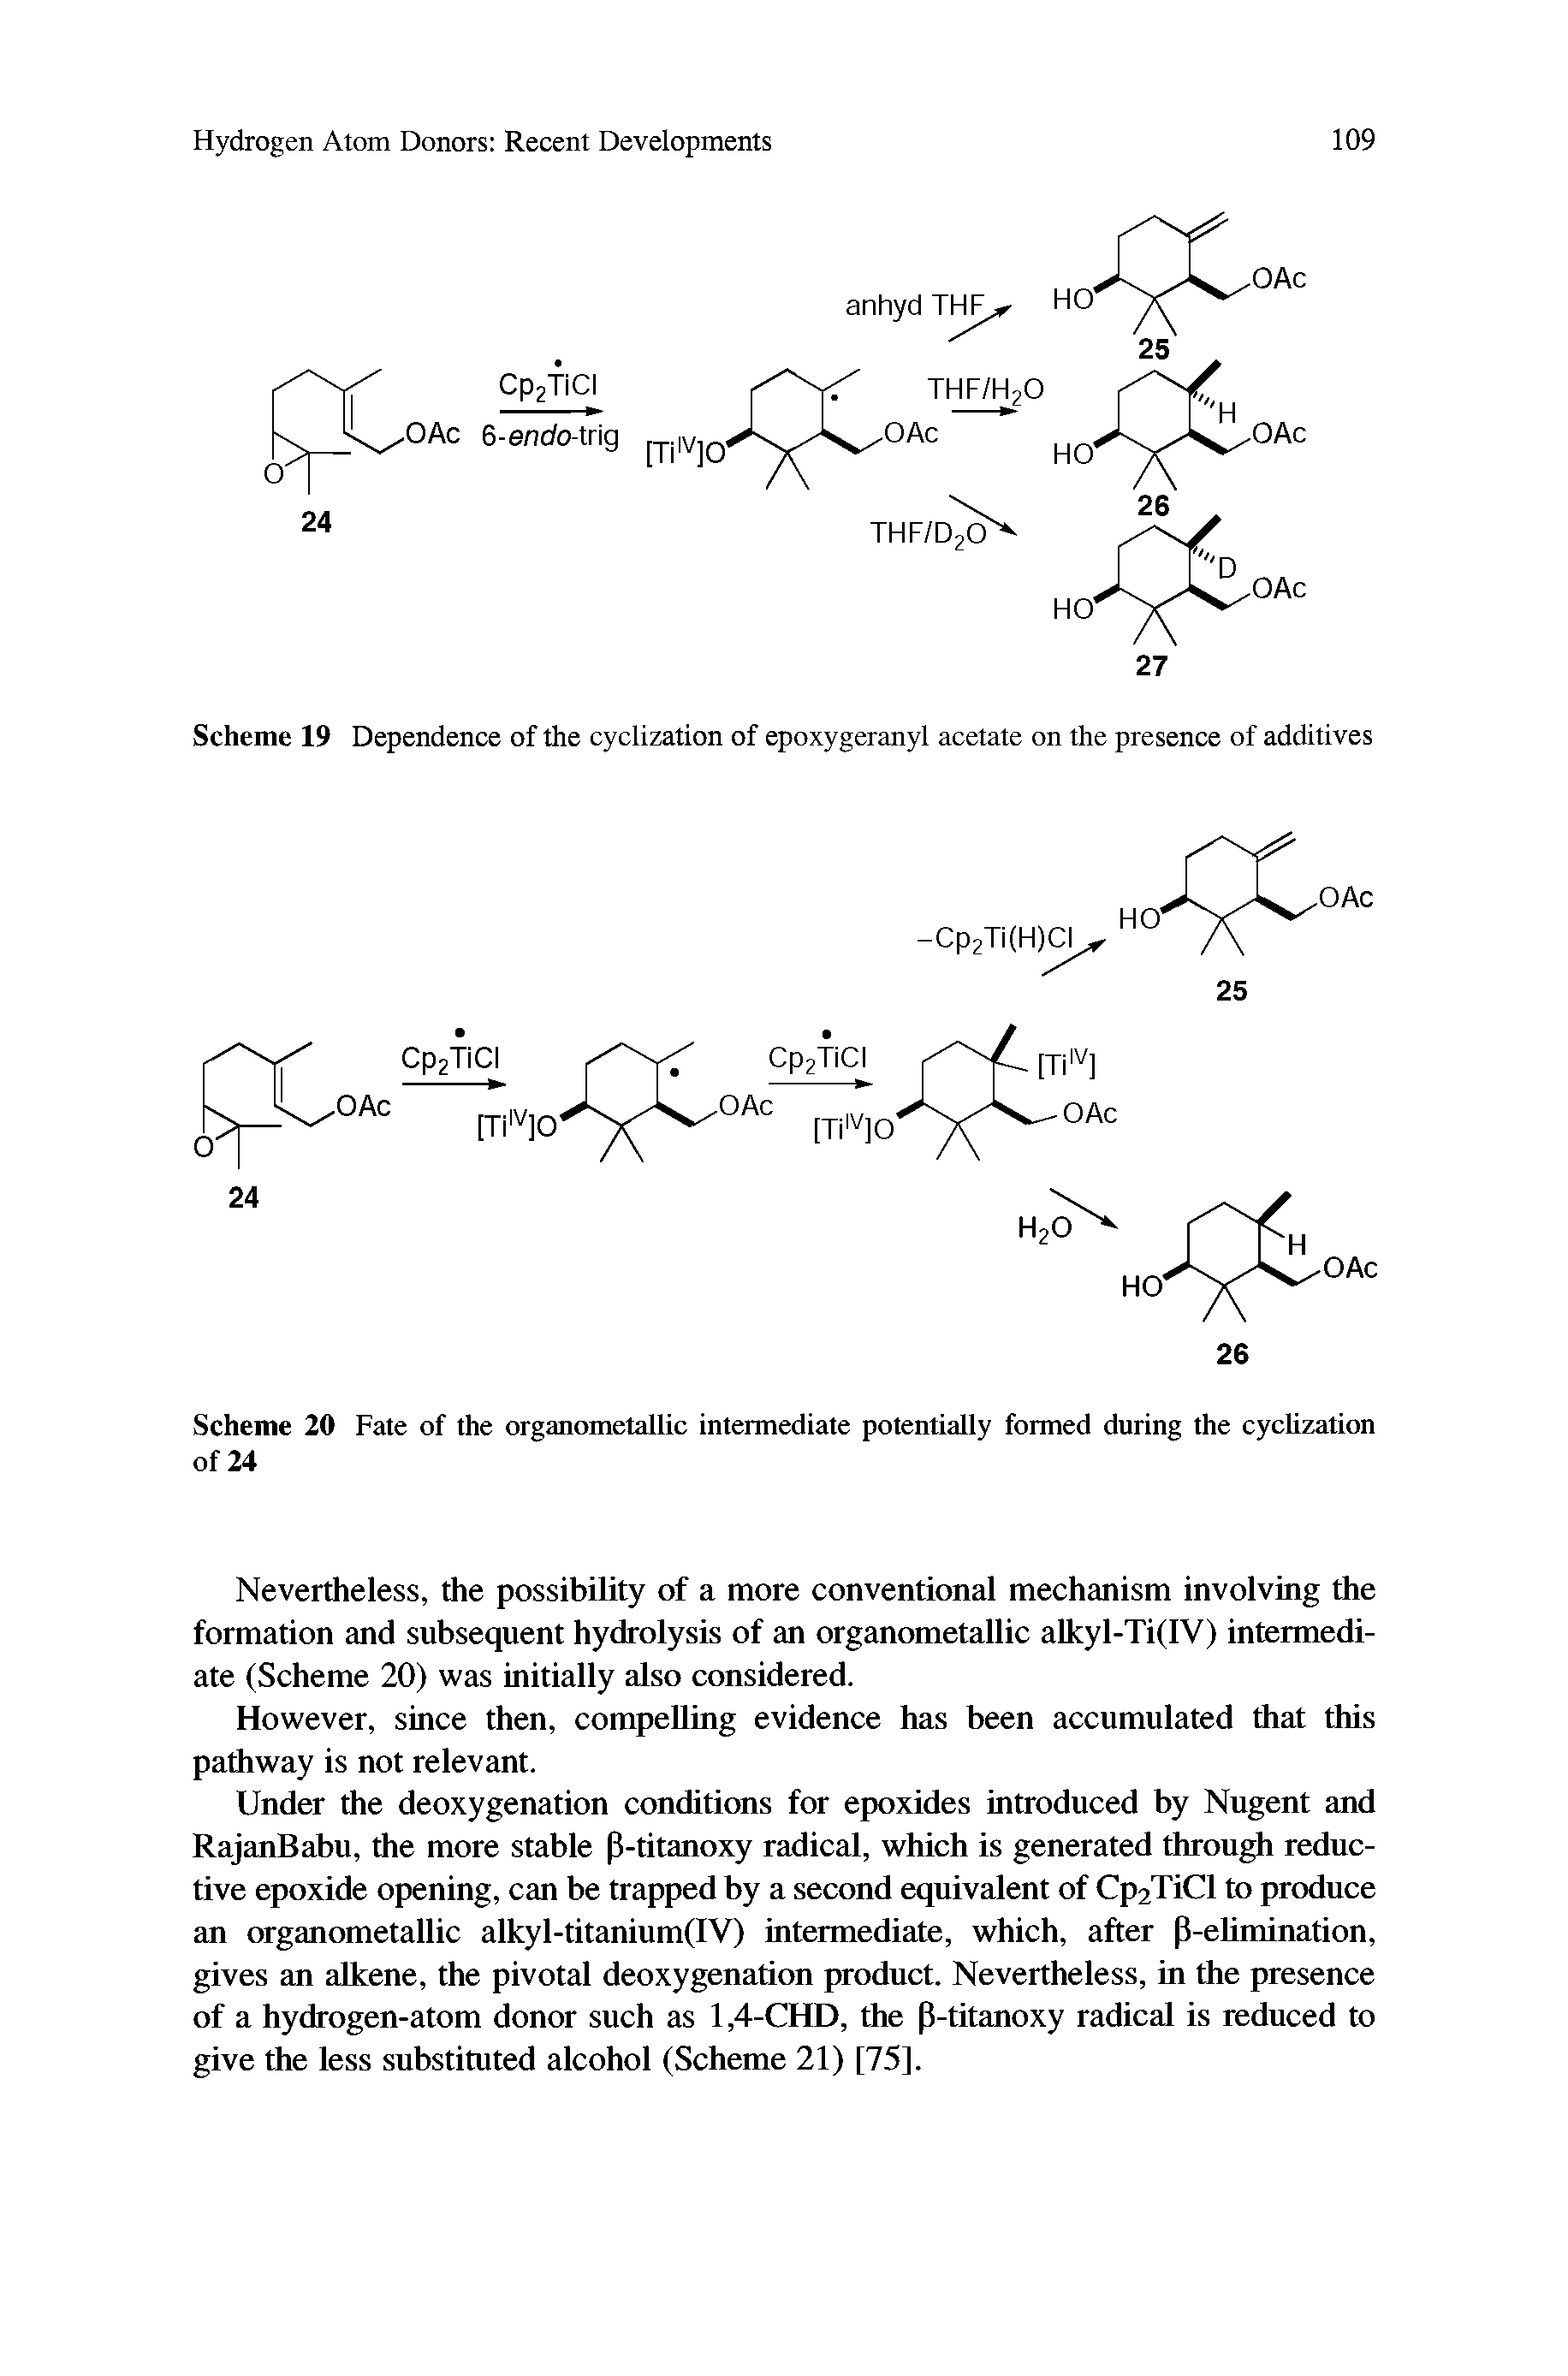 Scheme 19 Dependence of the cyclization of epoxygeranyl acetate on the presence of additives...